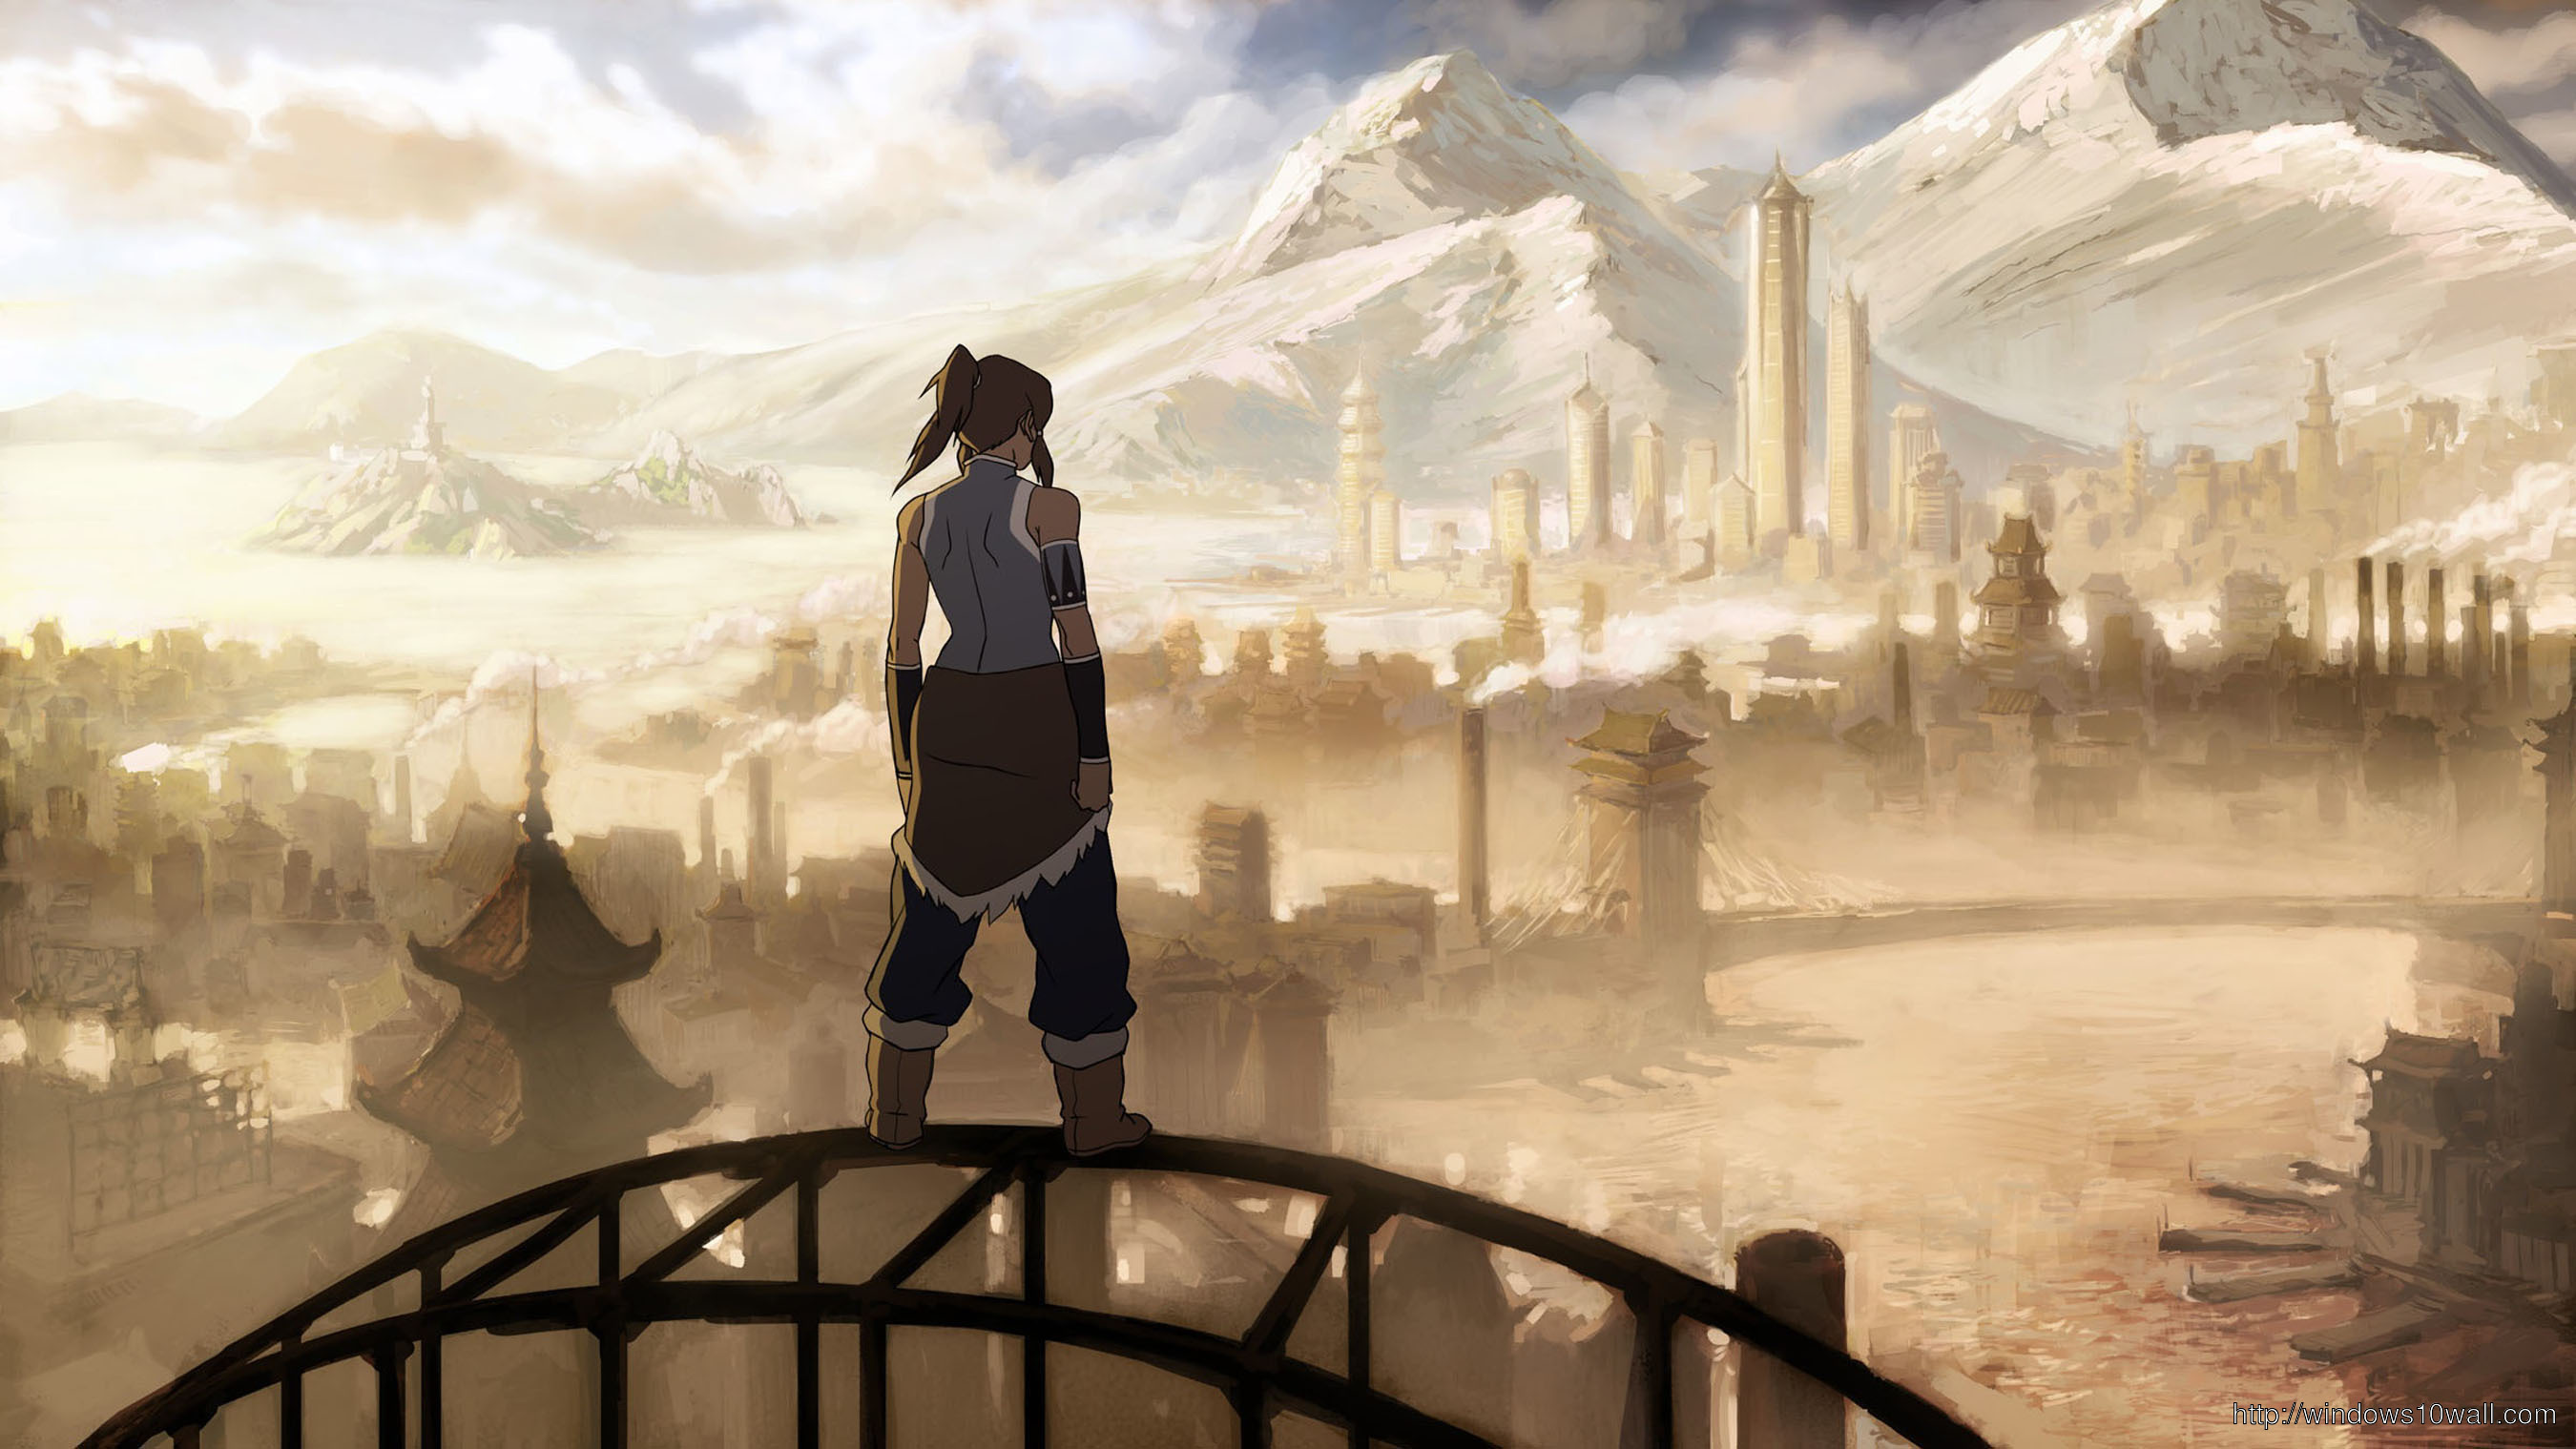 The Legend Of Korra Sequel to Animated Series Avatar